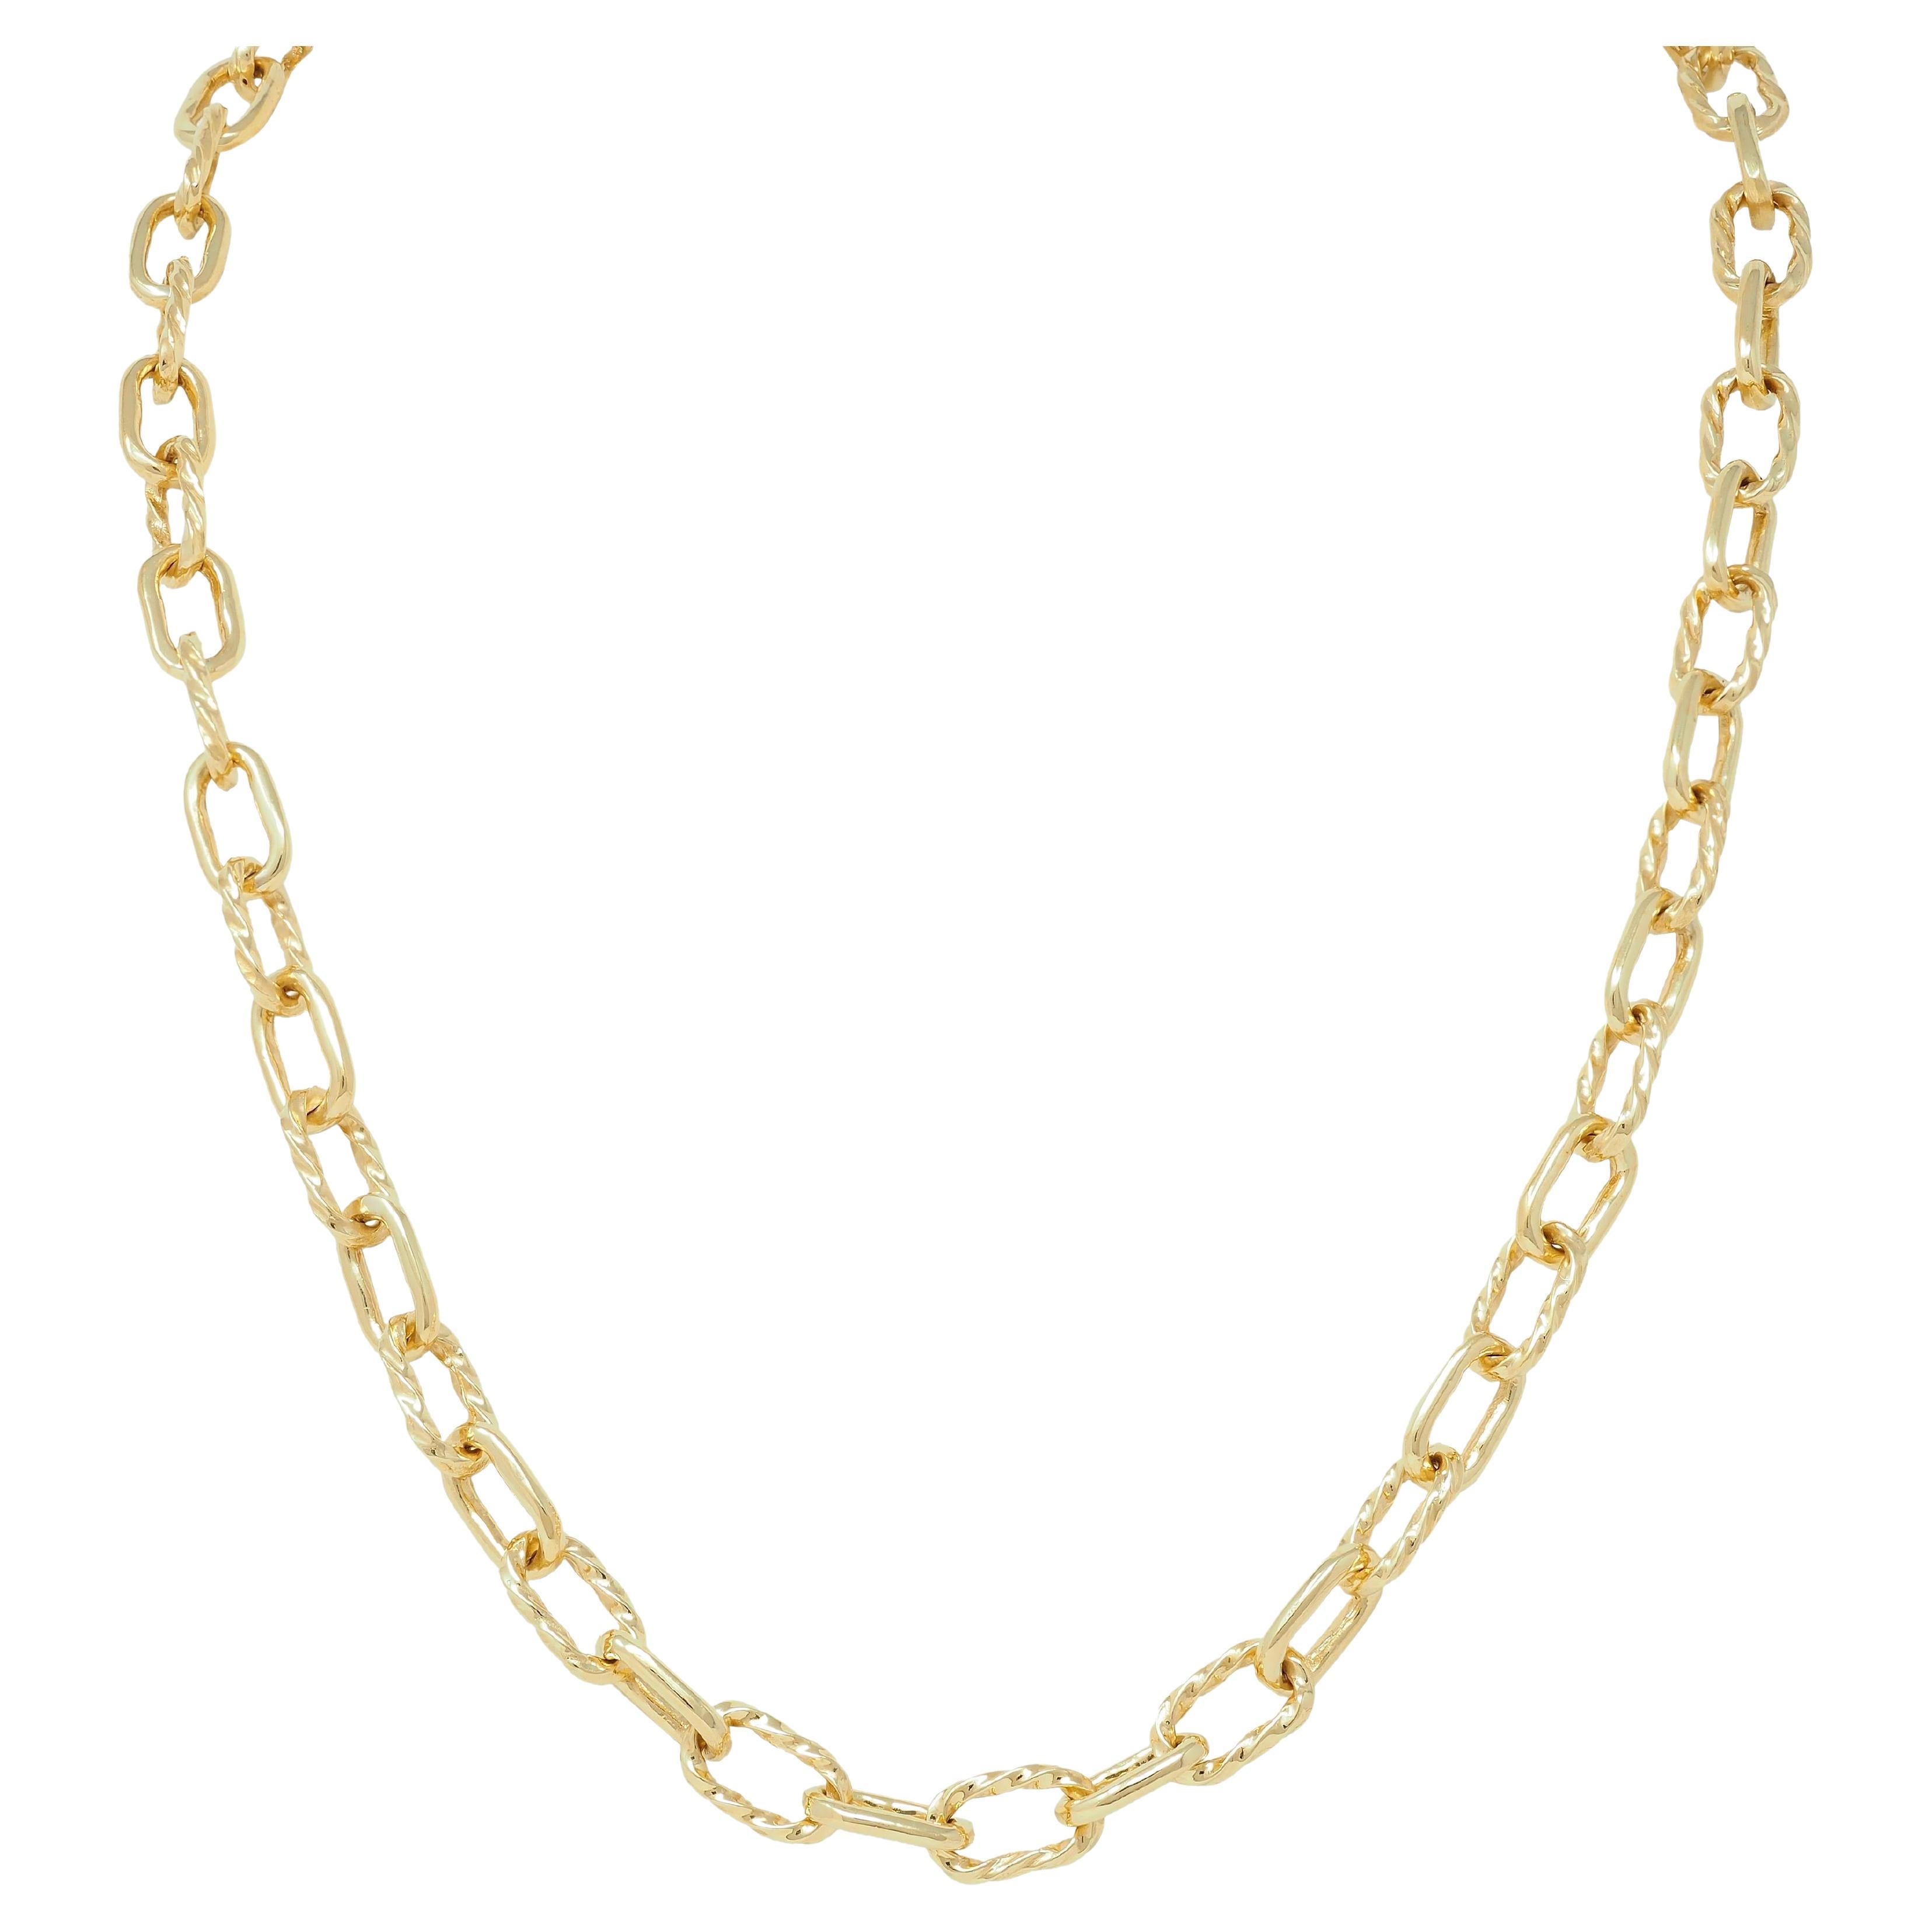 1960's 18 Karat Yellow Gold Twisted Cable Link Vintage Chain Necklace